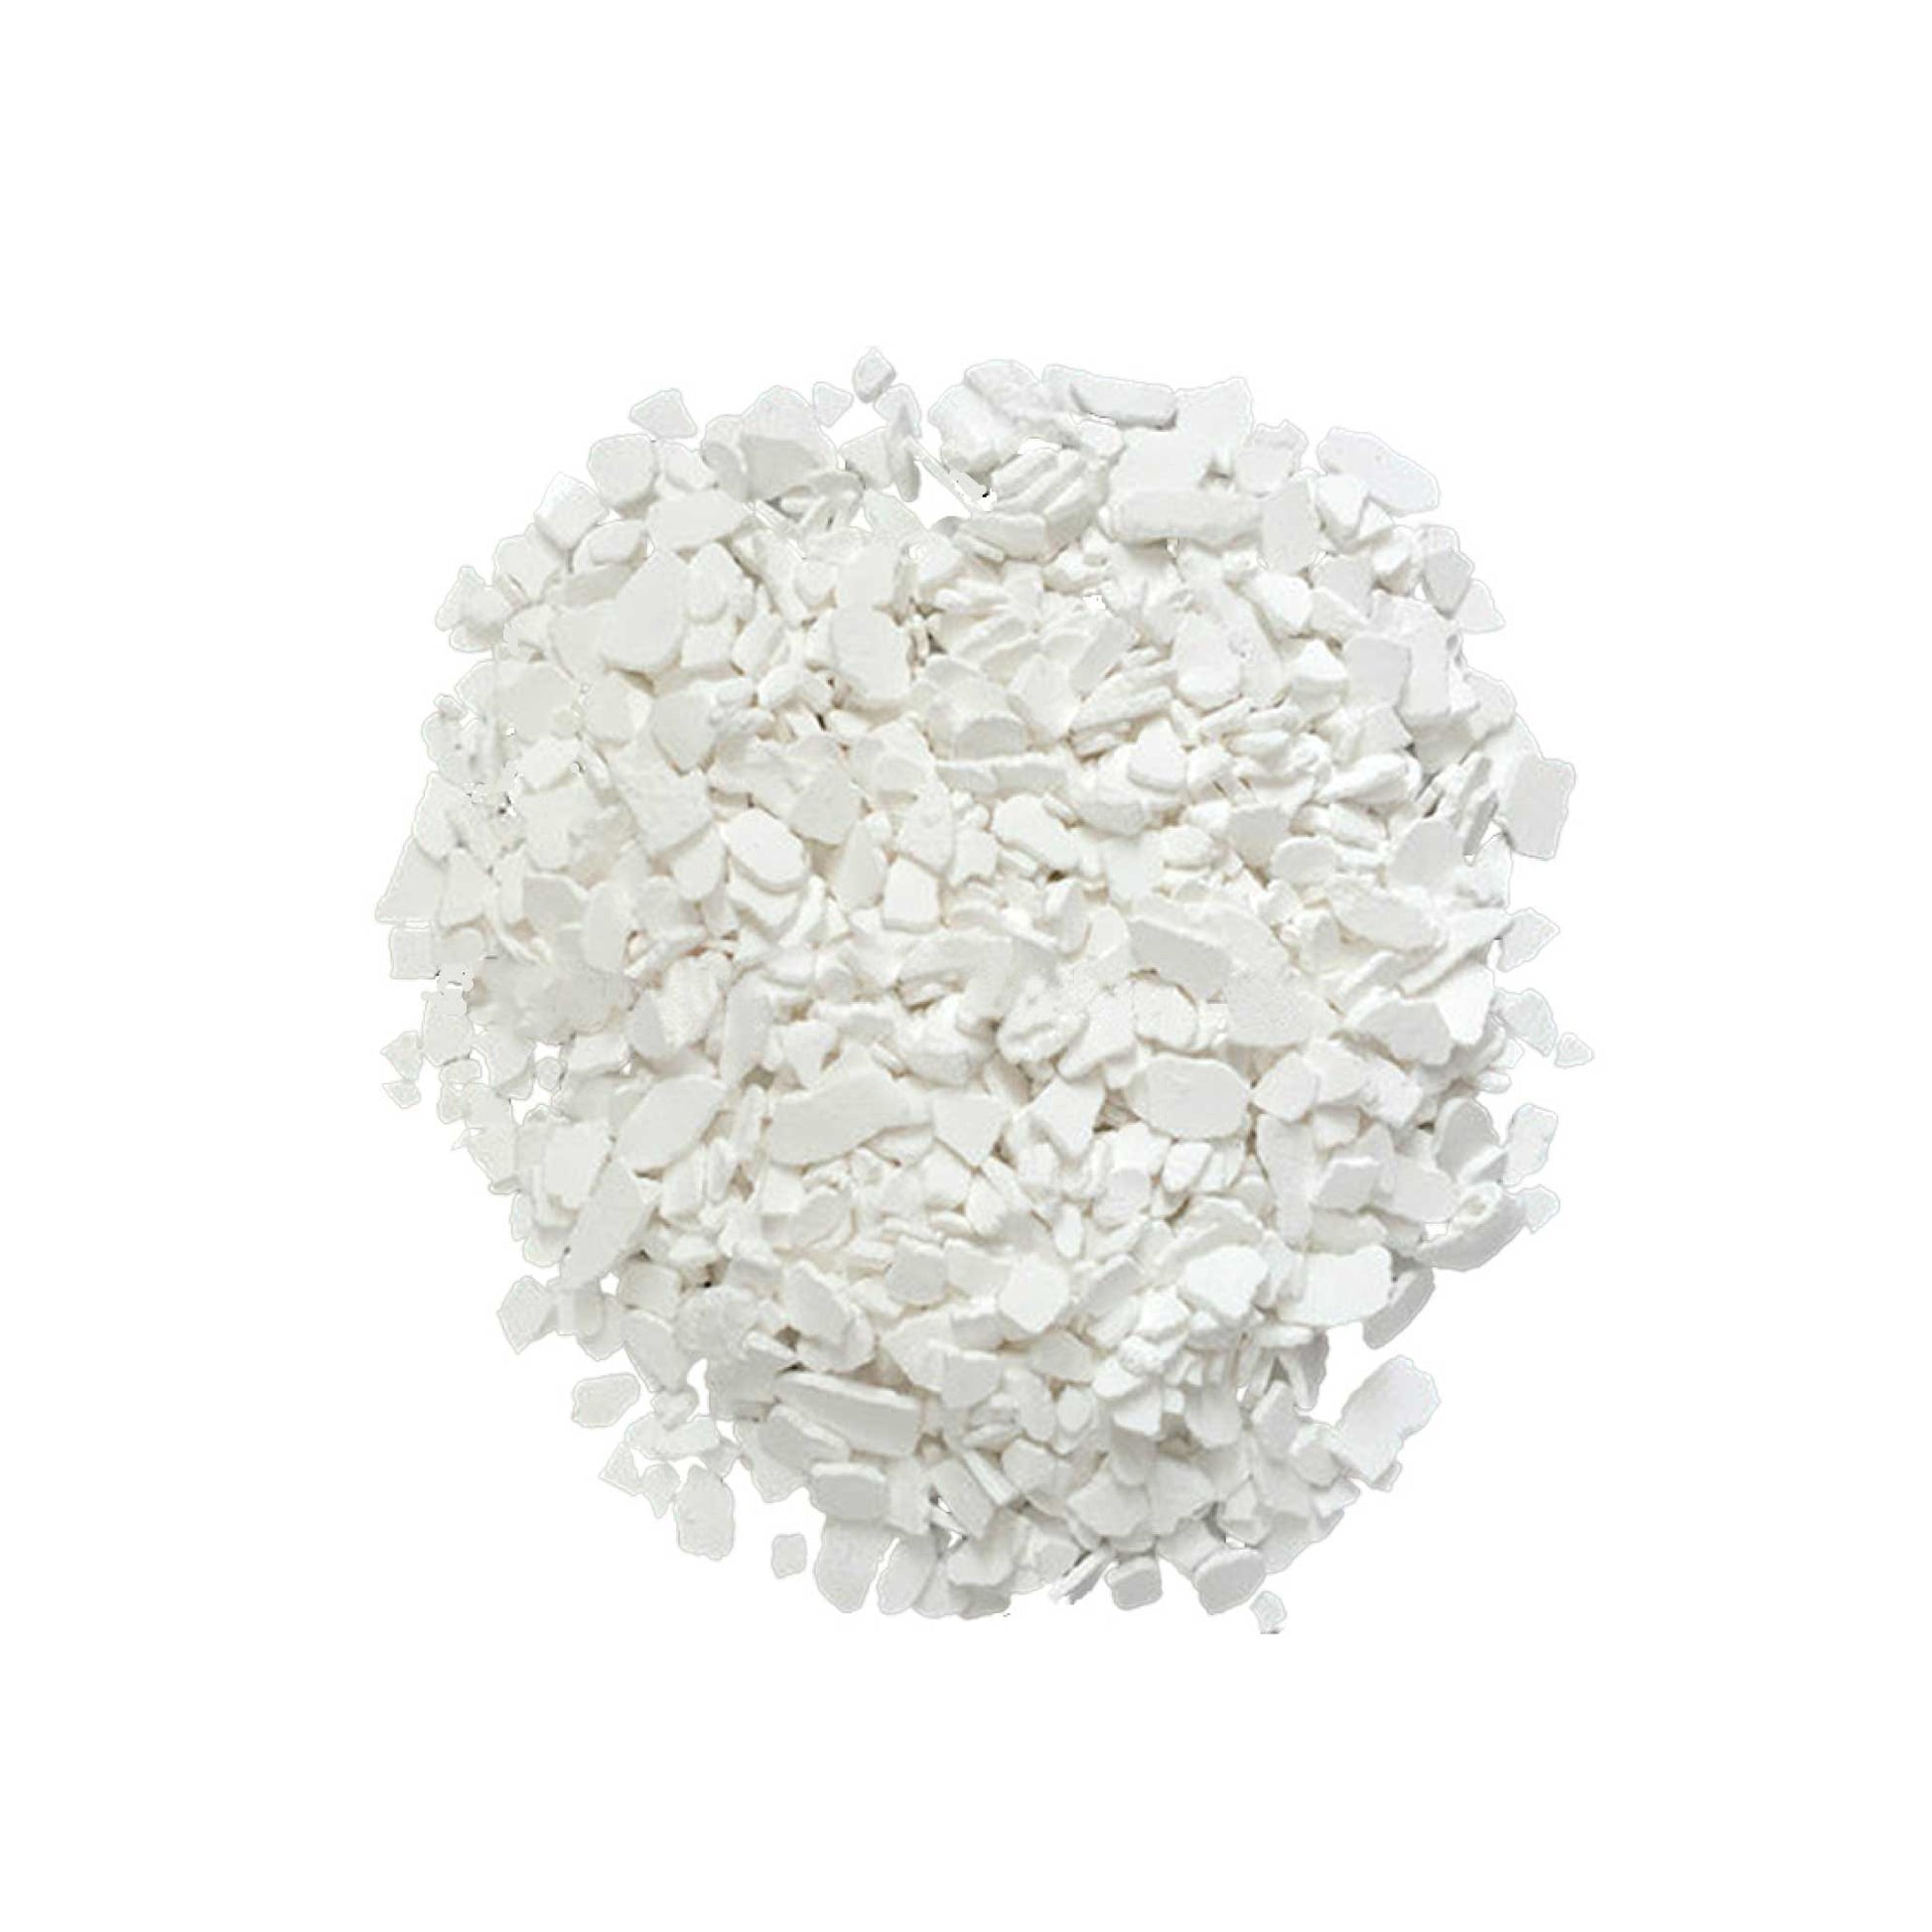 5Kg Calcium Chloride Flakes CaCl2 FCC 77% Food Grade Soluble Cheese Making Beer